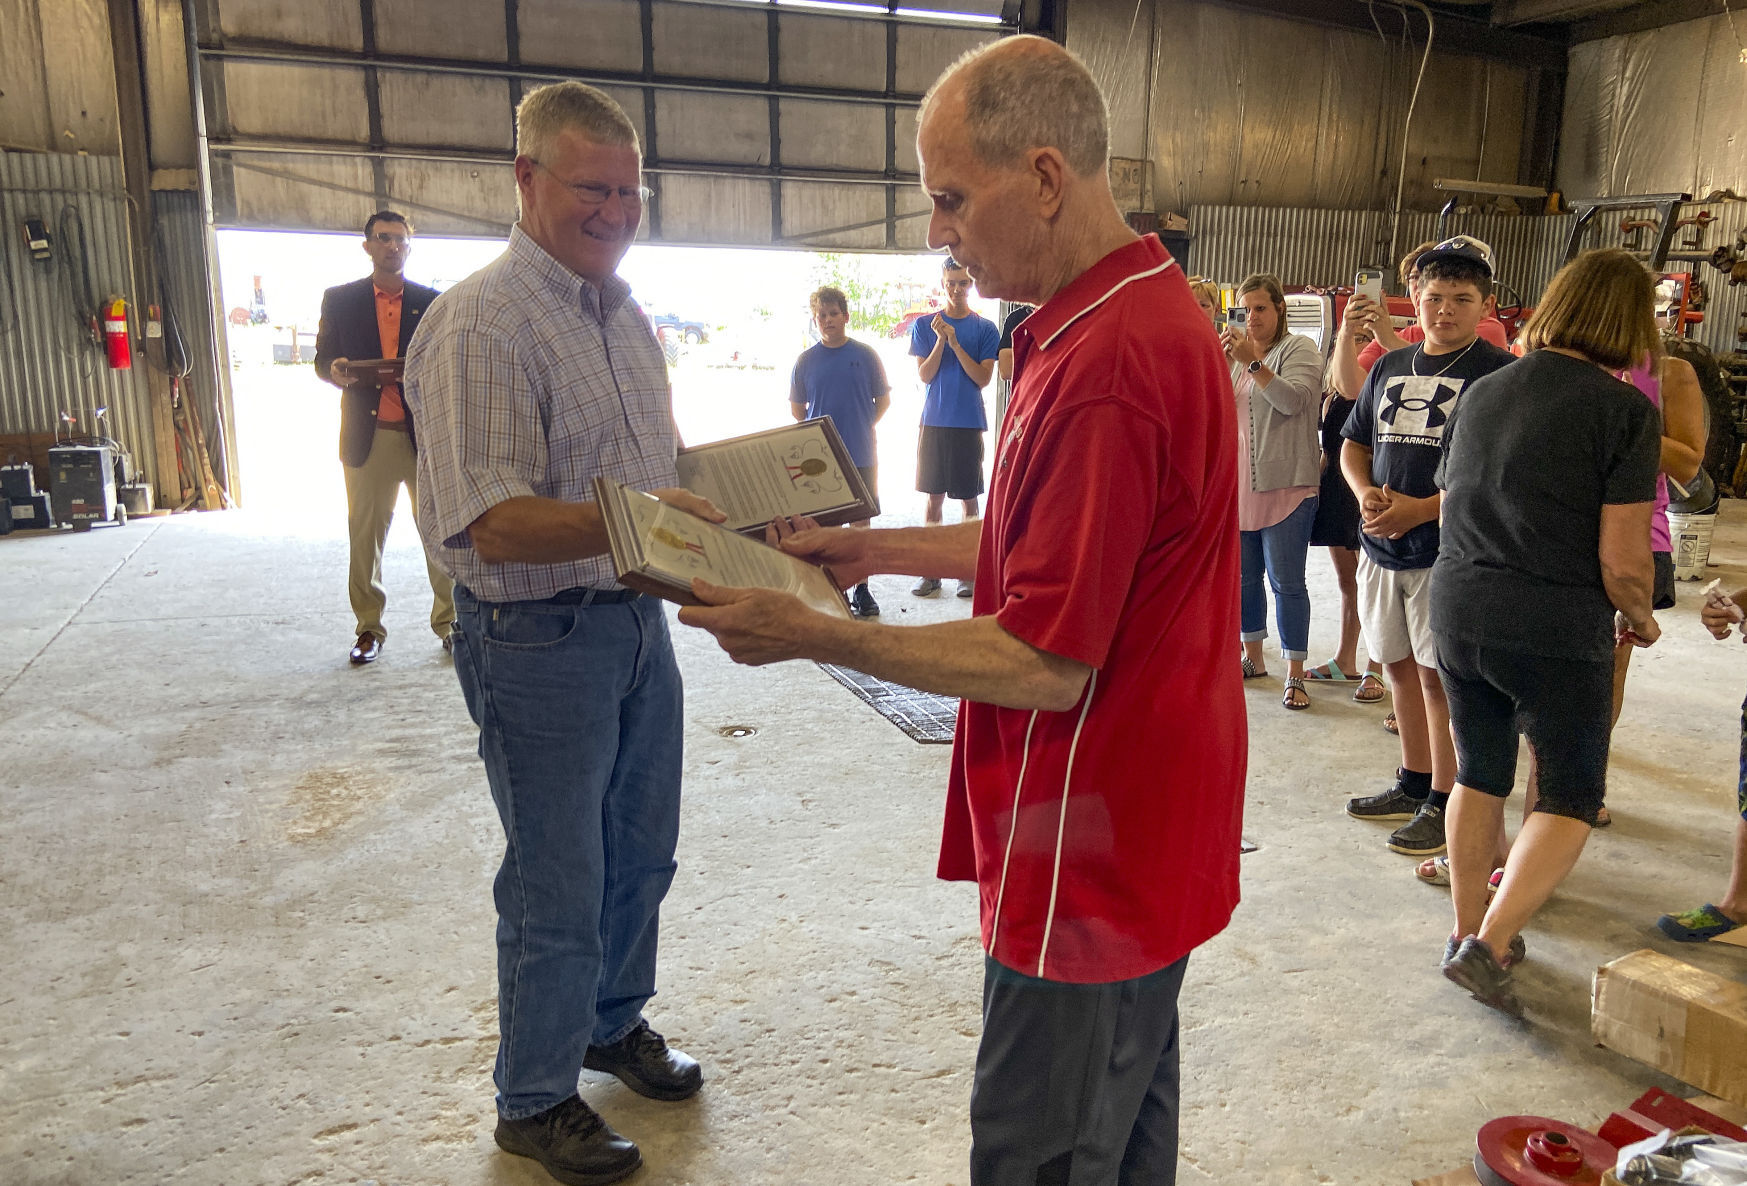 Wisconsin Sen. Howard Marklein, R-Spring Green, hands a legislative citation to Larry Freiburger, a retired co-founder of Grant Equipment Co. in Cuba City, Wis., on Friday. PHOTO CREDIT: Bennet Goldstein